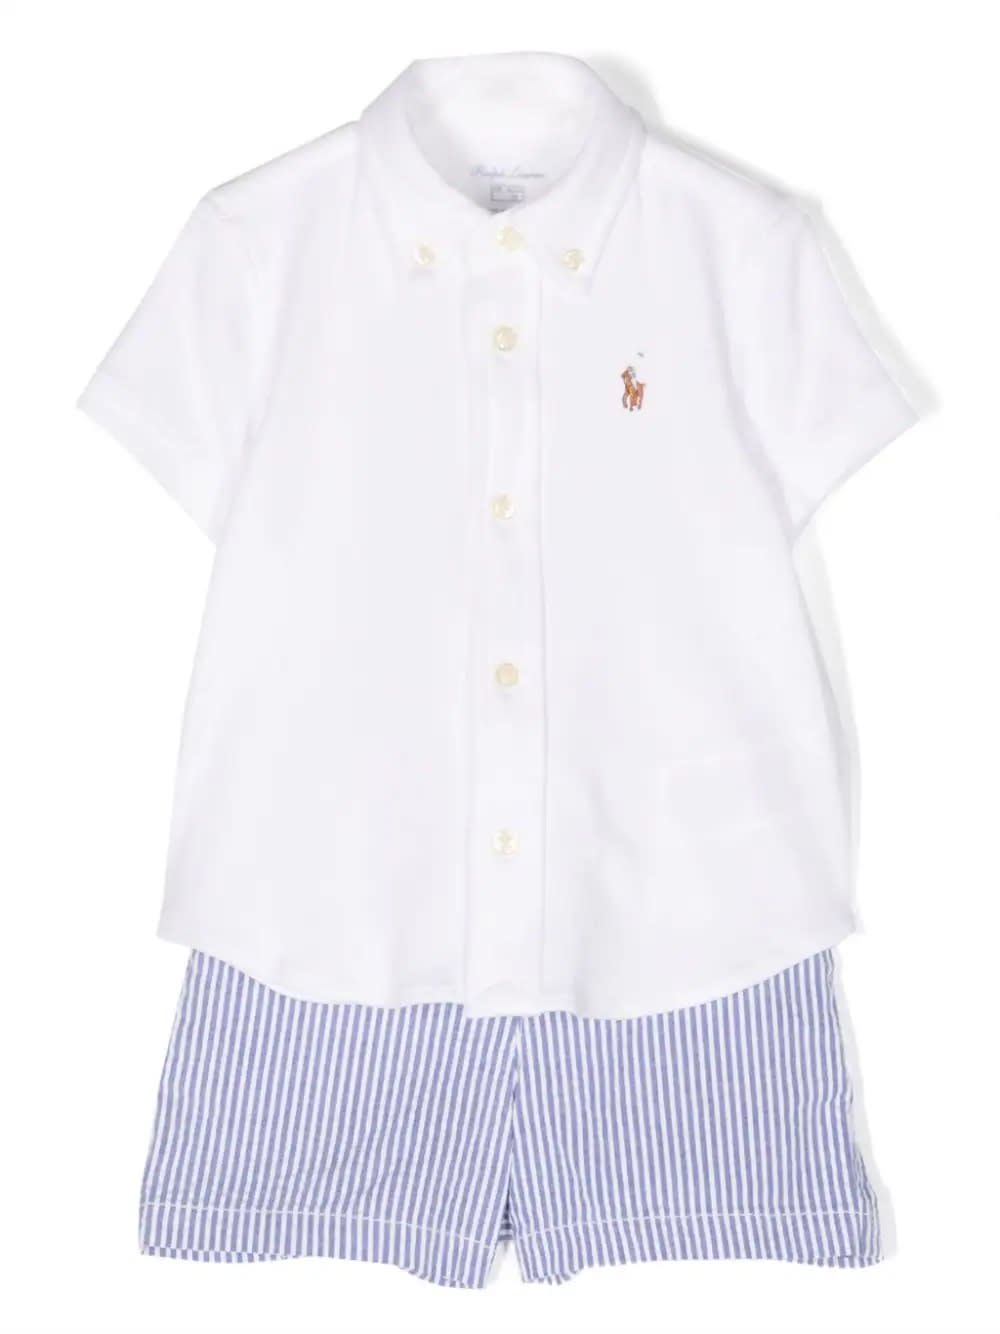 Ralph Lauren Babies' White And Light Blue Set With Shirt And Shorts